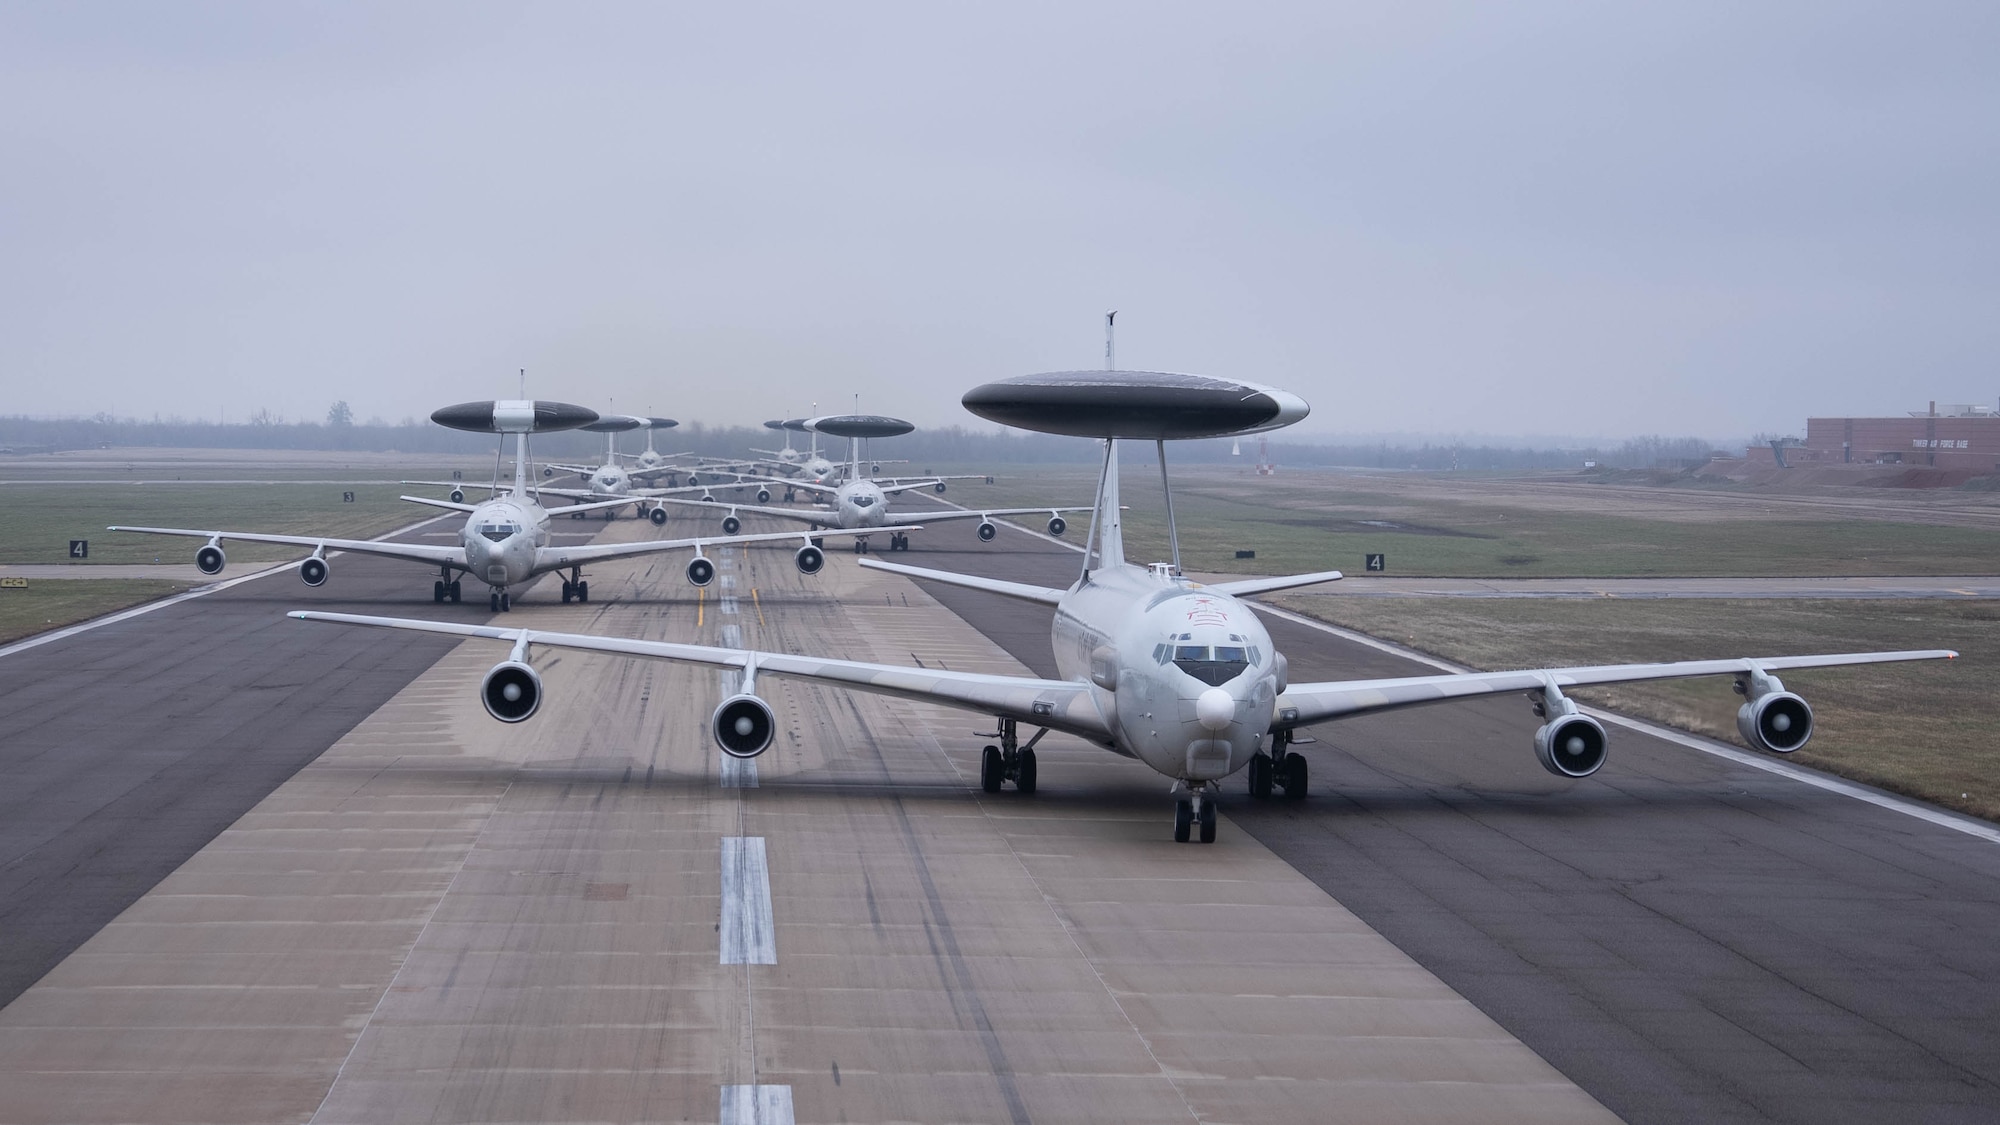 Seven E-3G Sentry aircraft lined up on runway